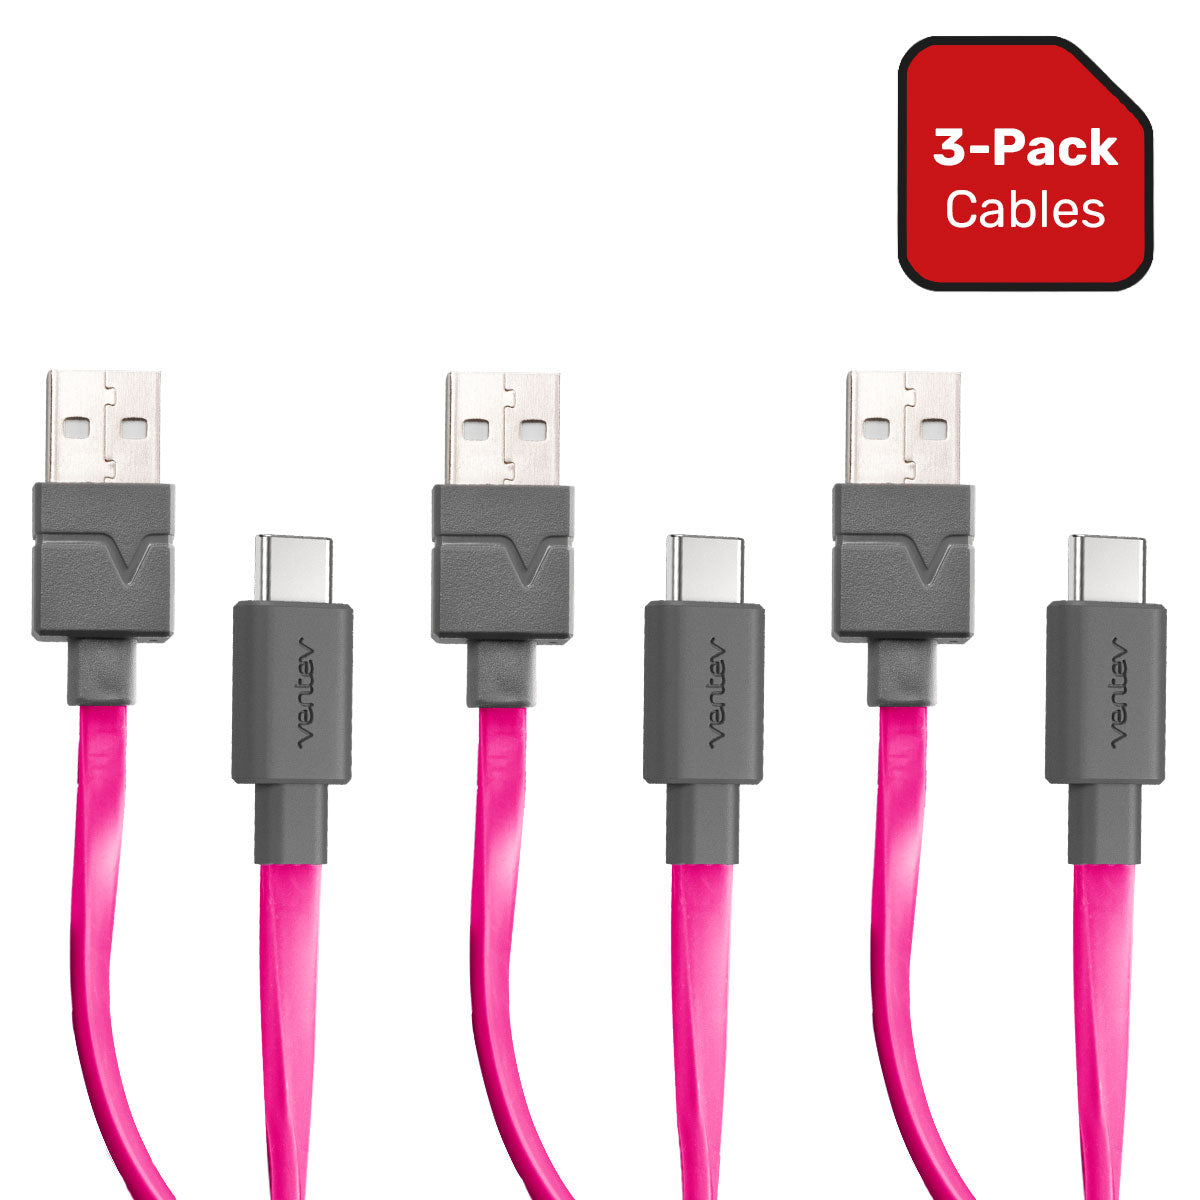 3-Pack Ventev Chargesync USB A To USB C Cable - Pink